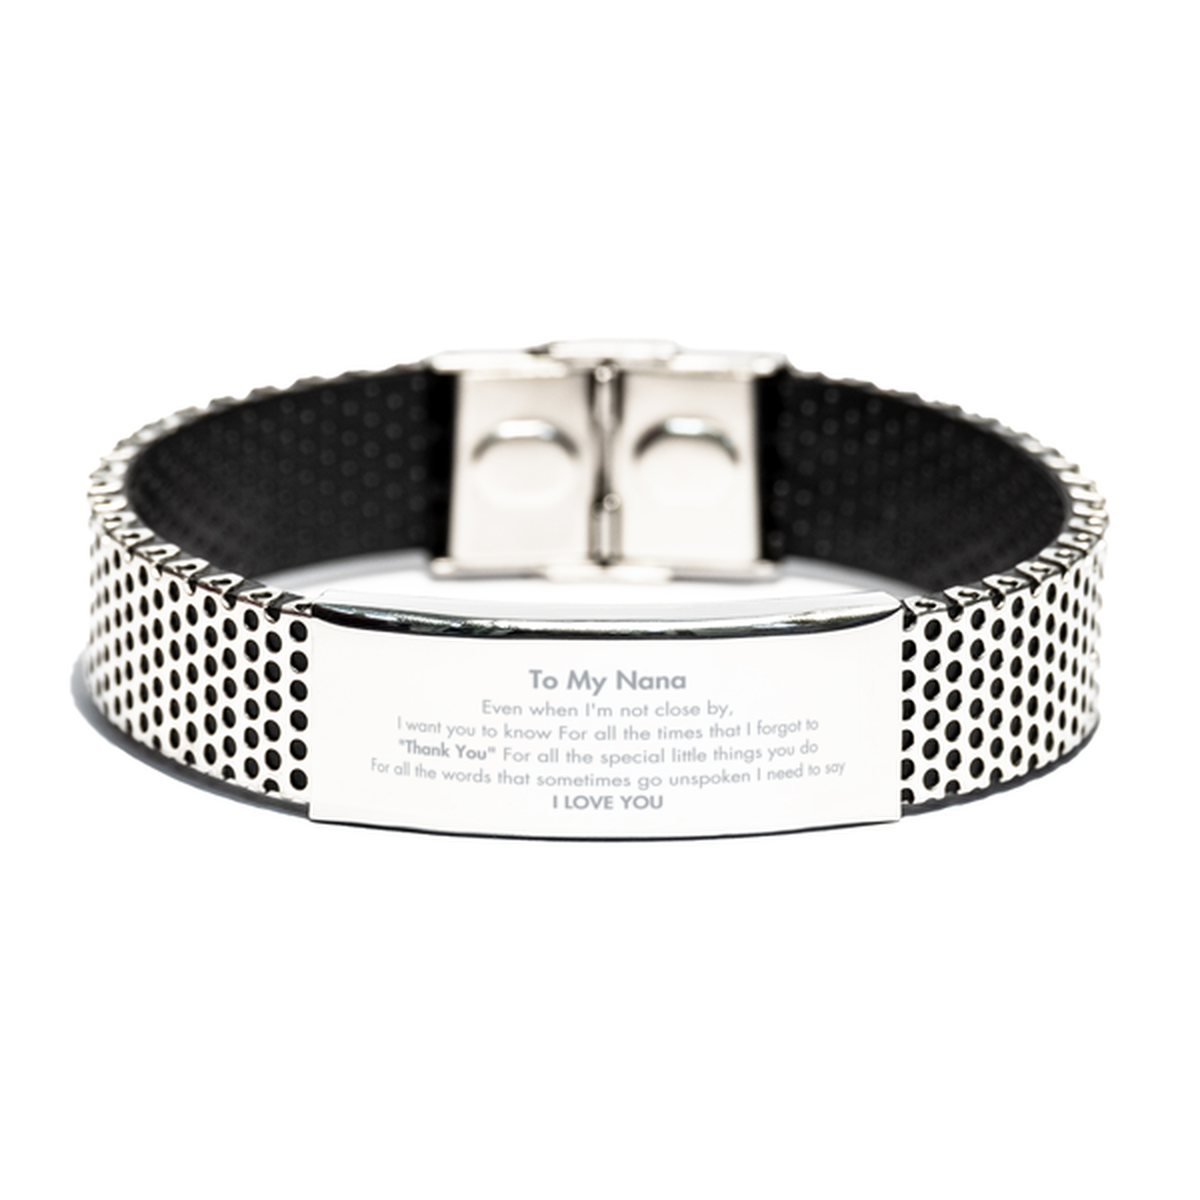 Thank You Gifts for Nana, Keepsake Stainless Steel Bracelet Gifts for Nana Birthday Mother's day Father's Day Nana For all the words That sometimes go unspoken I need to say I LOVE YOU